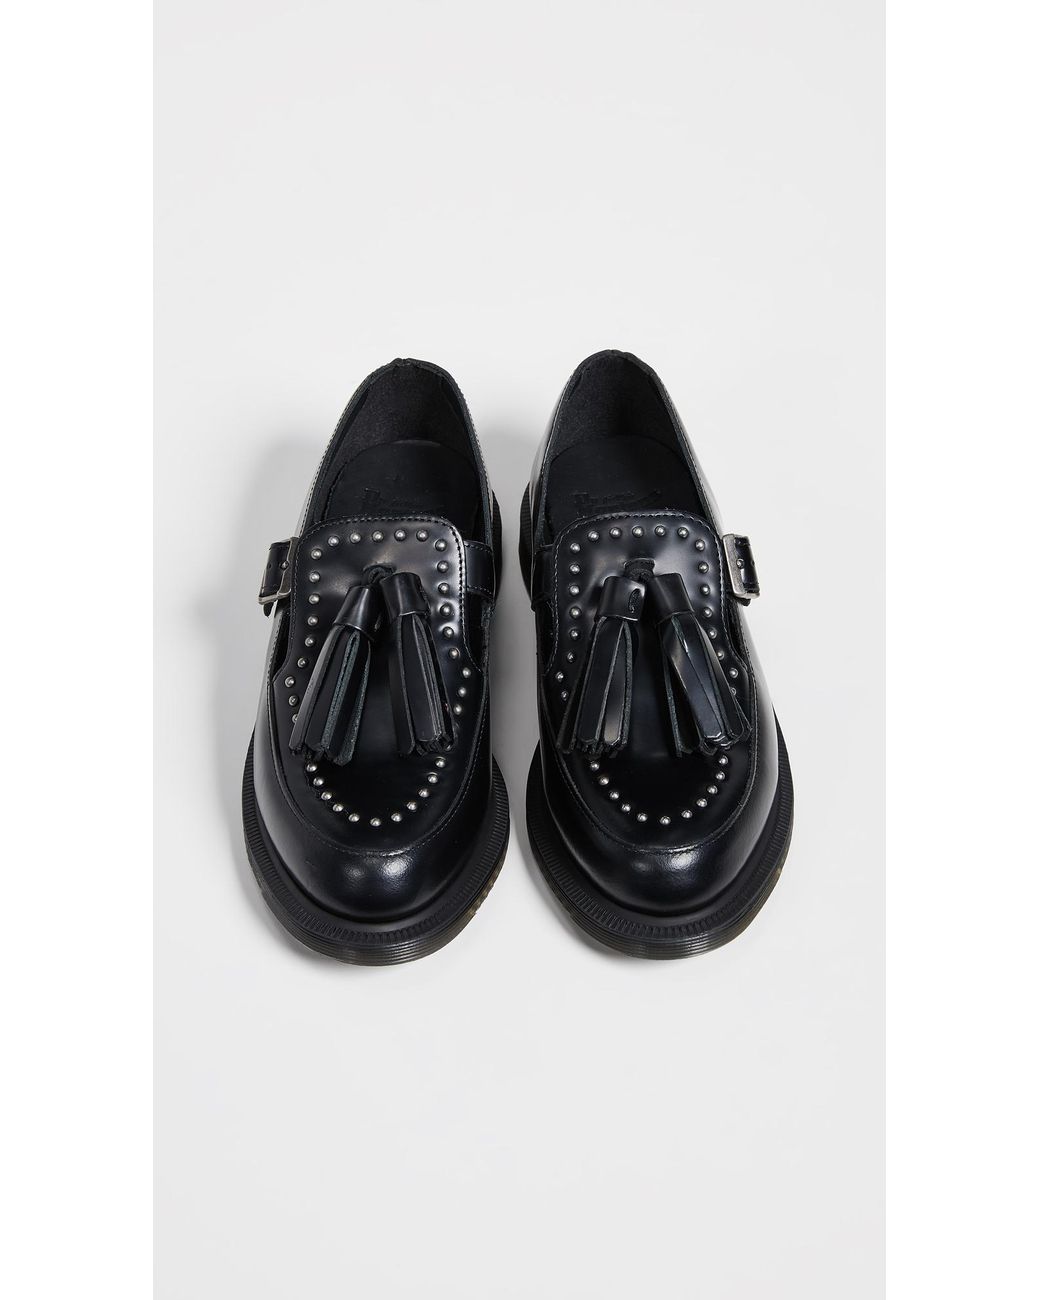 Dr. Martens Gracia Stud Mary Jane Shoes in Black | Lyst Canada